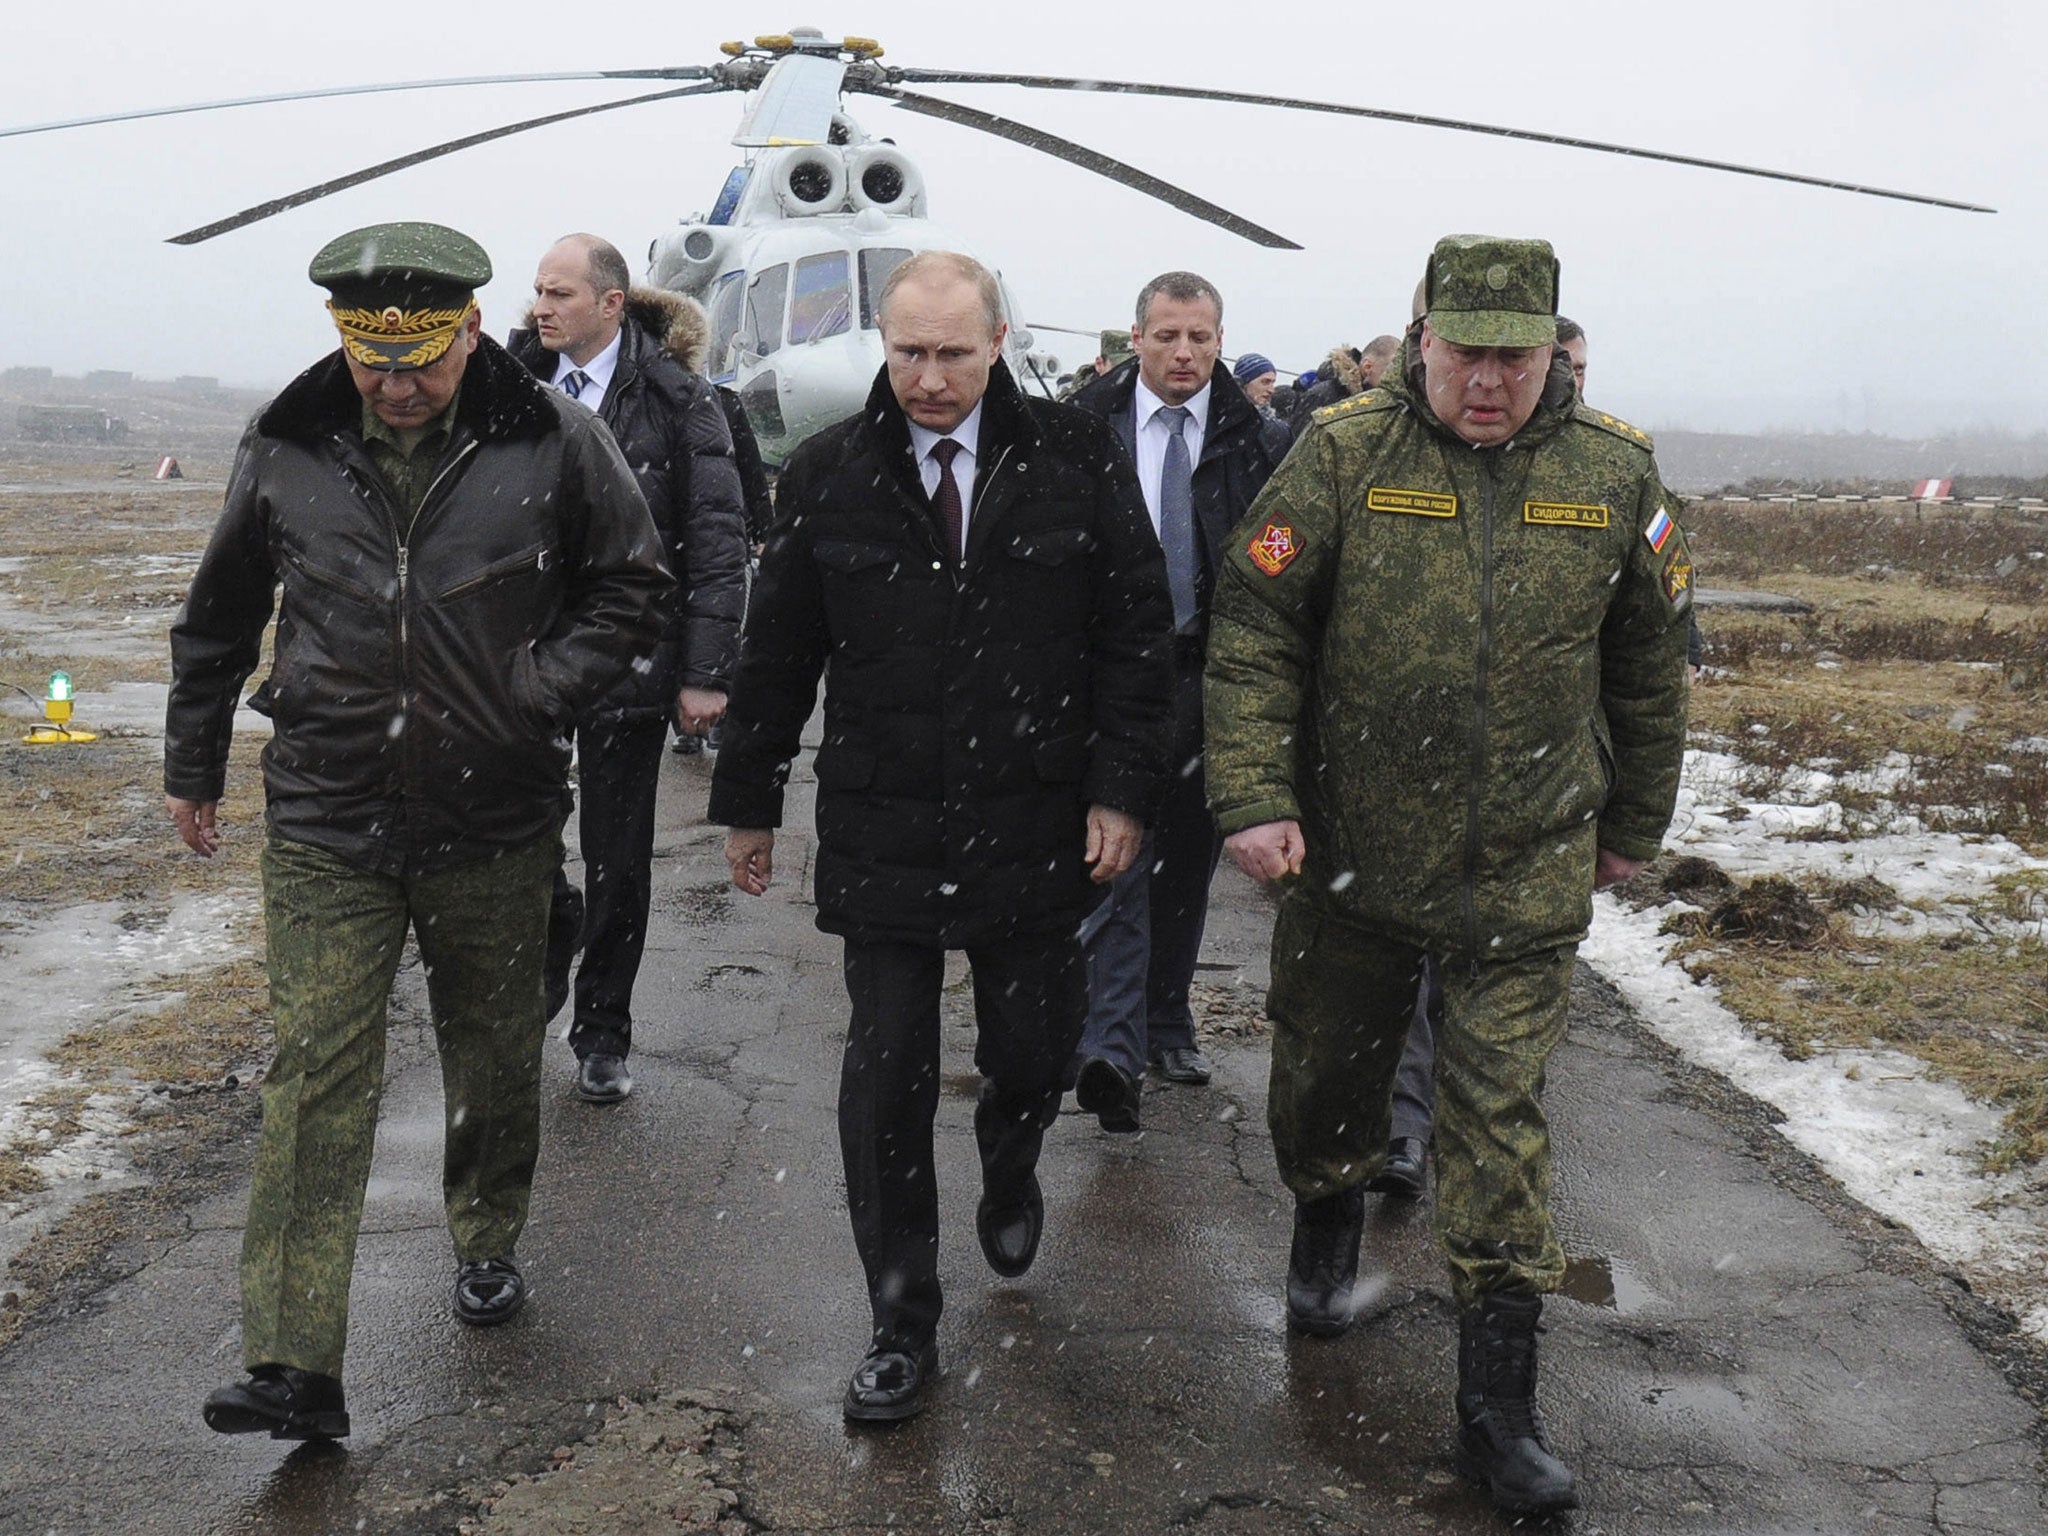 Russia's President Vladimir Putin, accompanied by Russian Defence Minister Sergei Shoigu (front left), walks to watch military exercises upon his arrival at the Kirillovsky firing ground in the Leningrad region